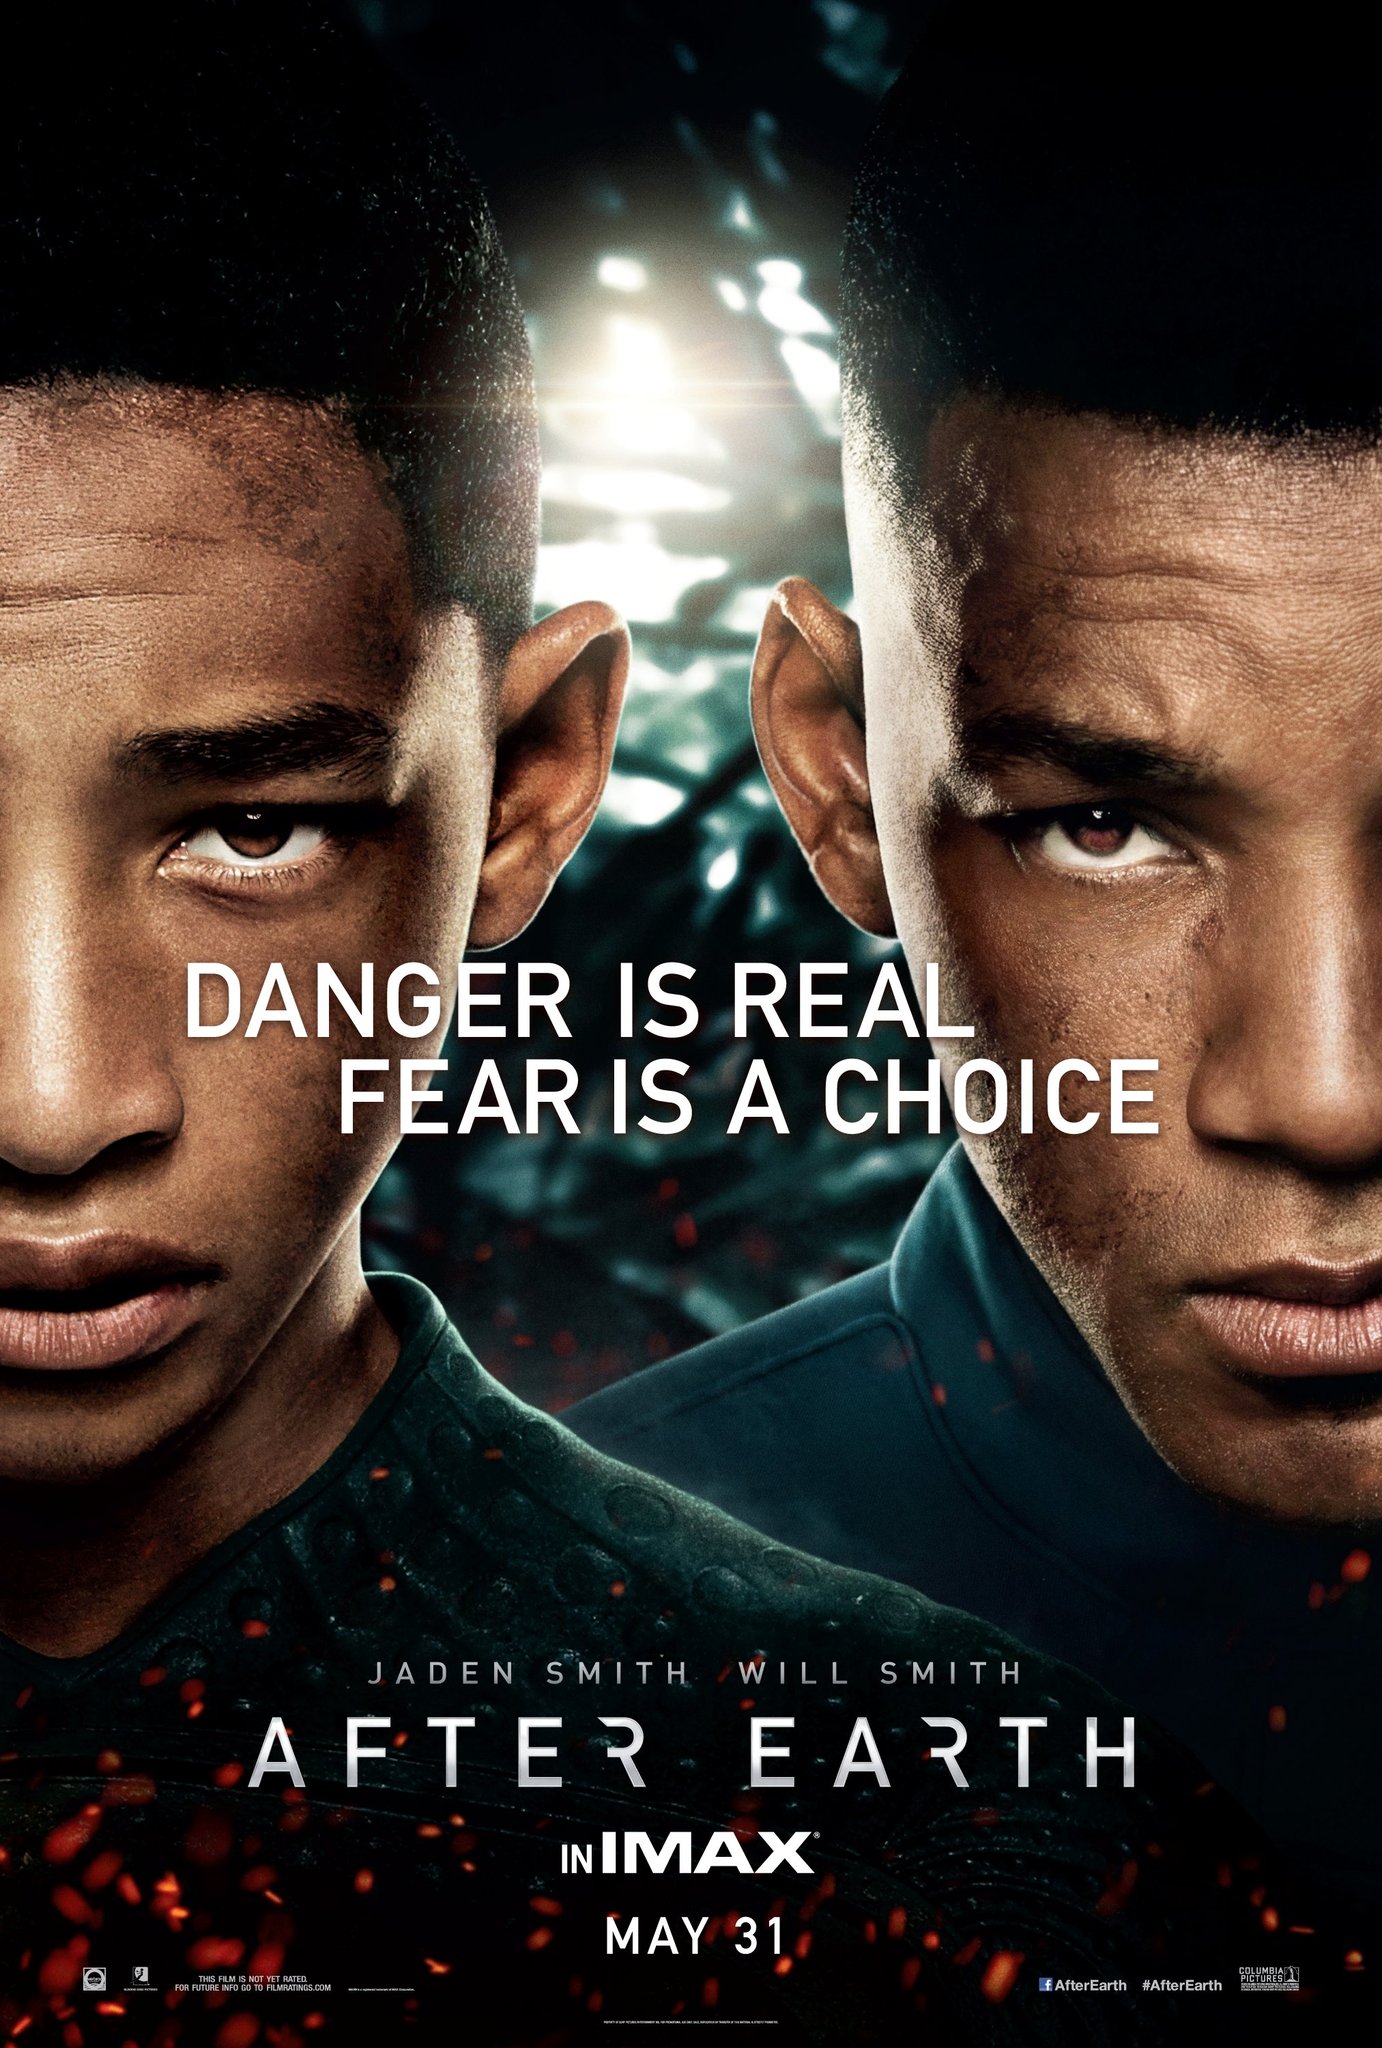 FULL MOVIE: After Earth (2013)